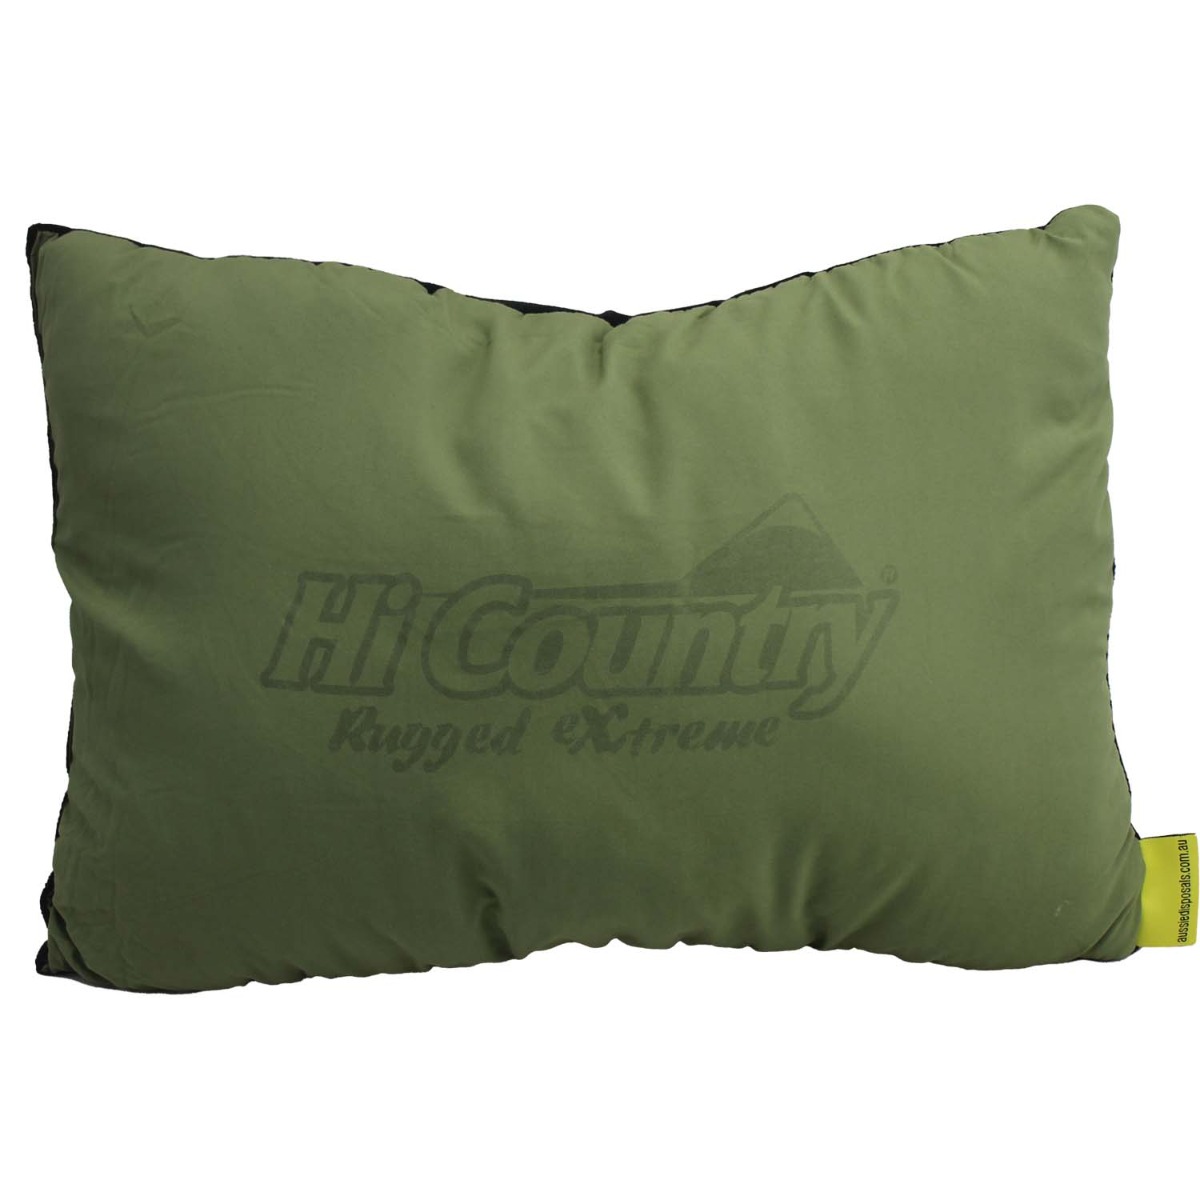 hi country rugged extreme pillow